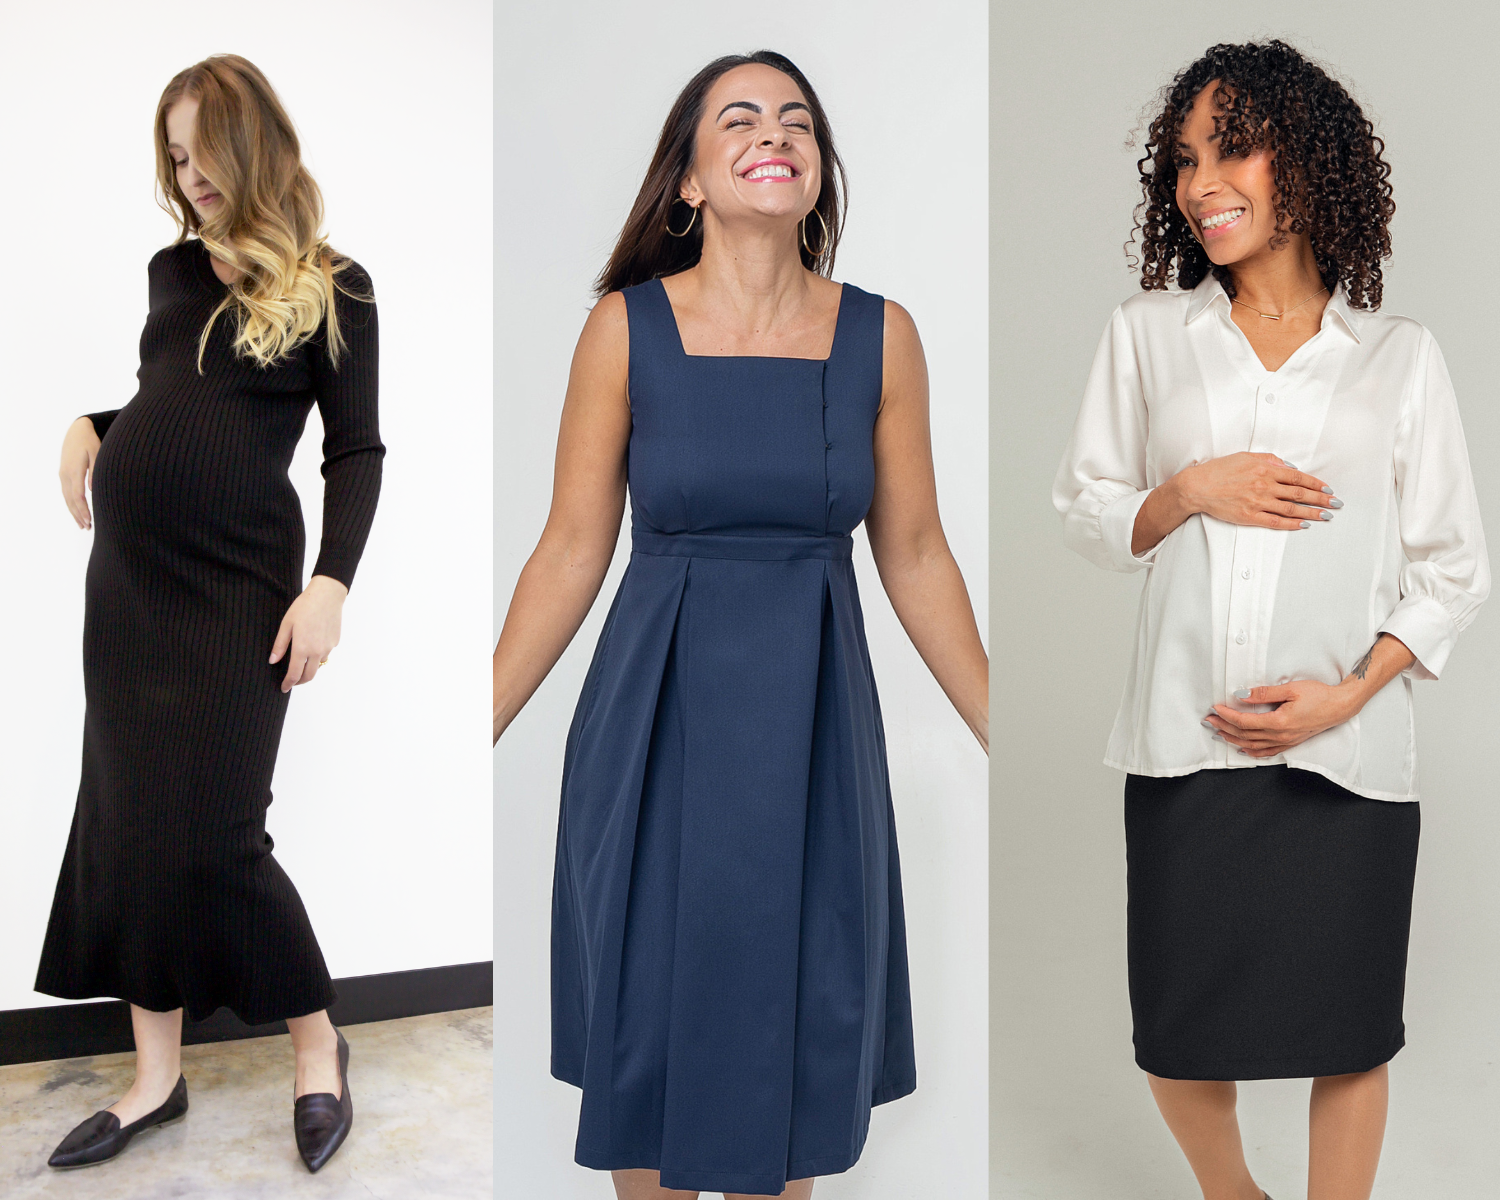 How to Build a Maternity Capsule Wardrobe in 6 Easy Steps